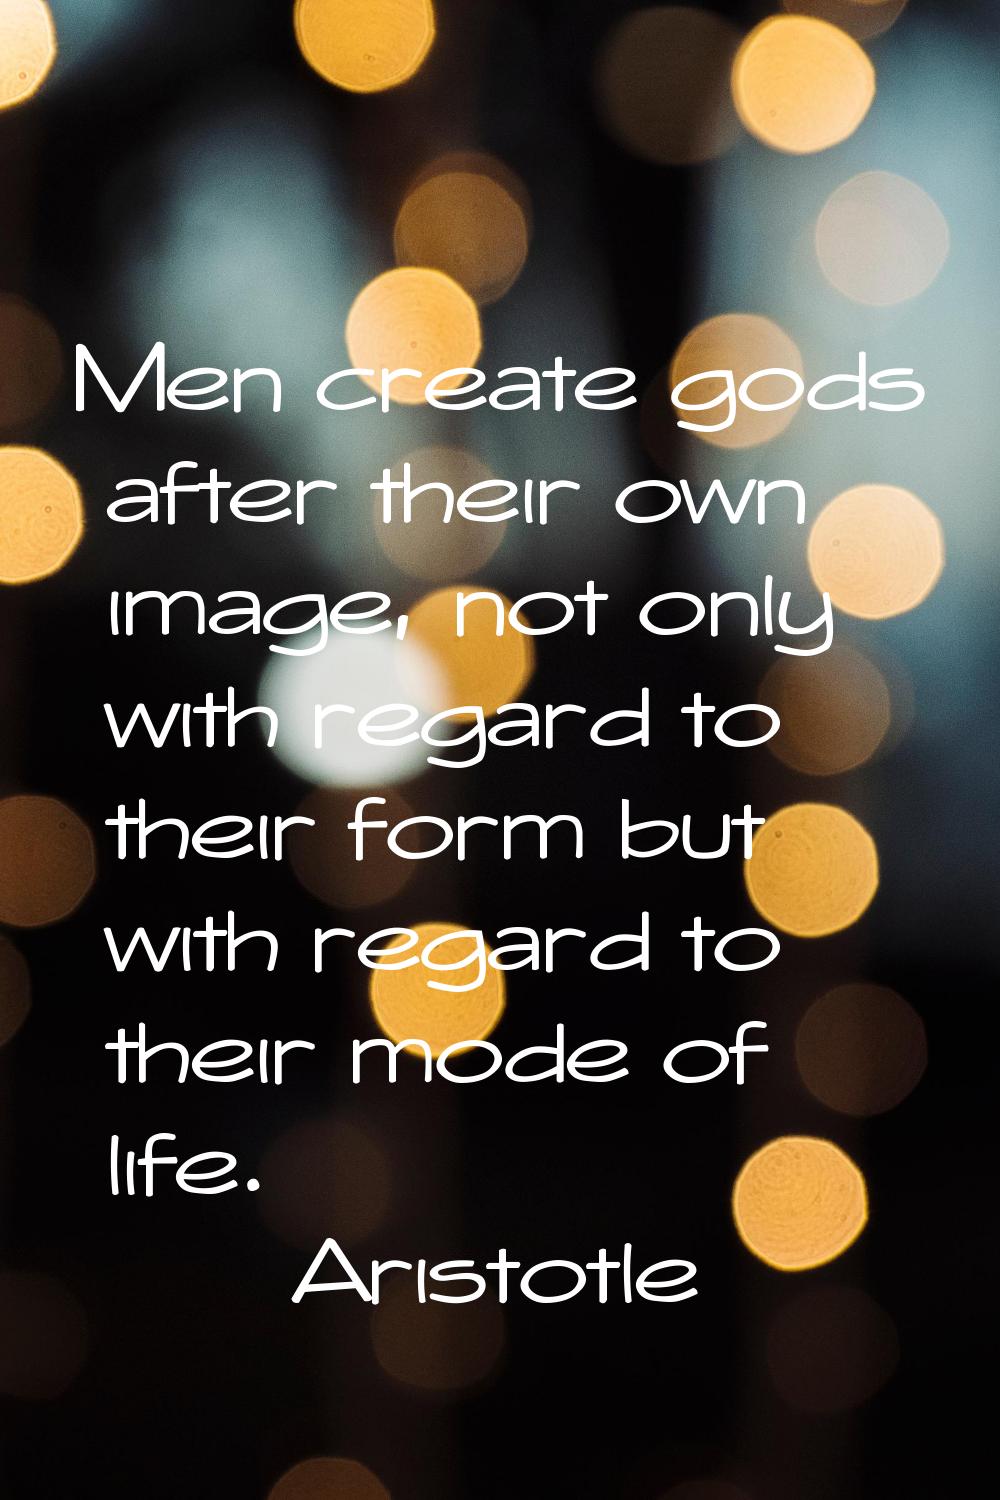 Men create gods after their own image, not only with regard to their form but with regard to their 